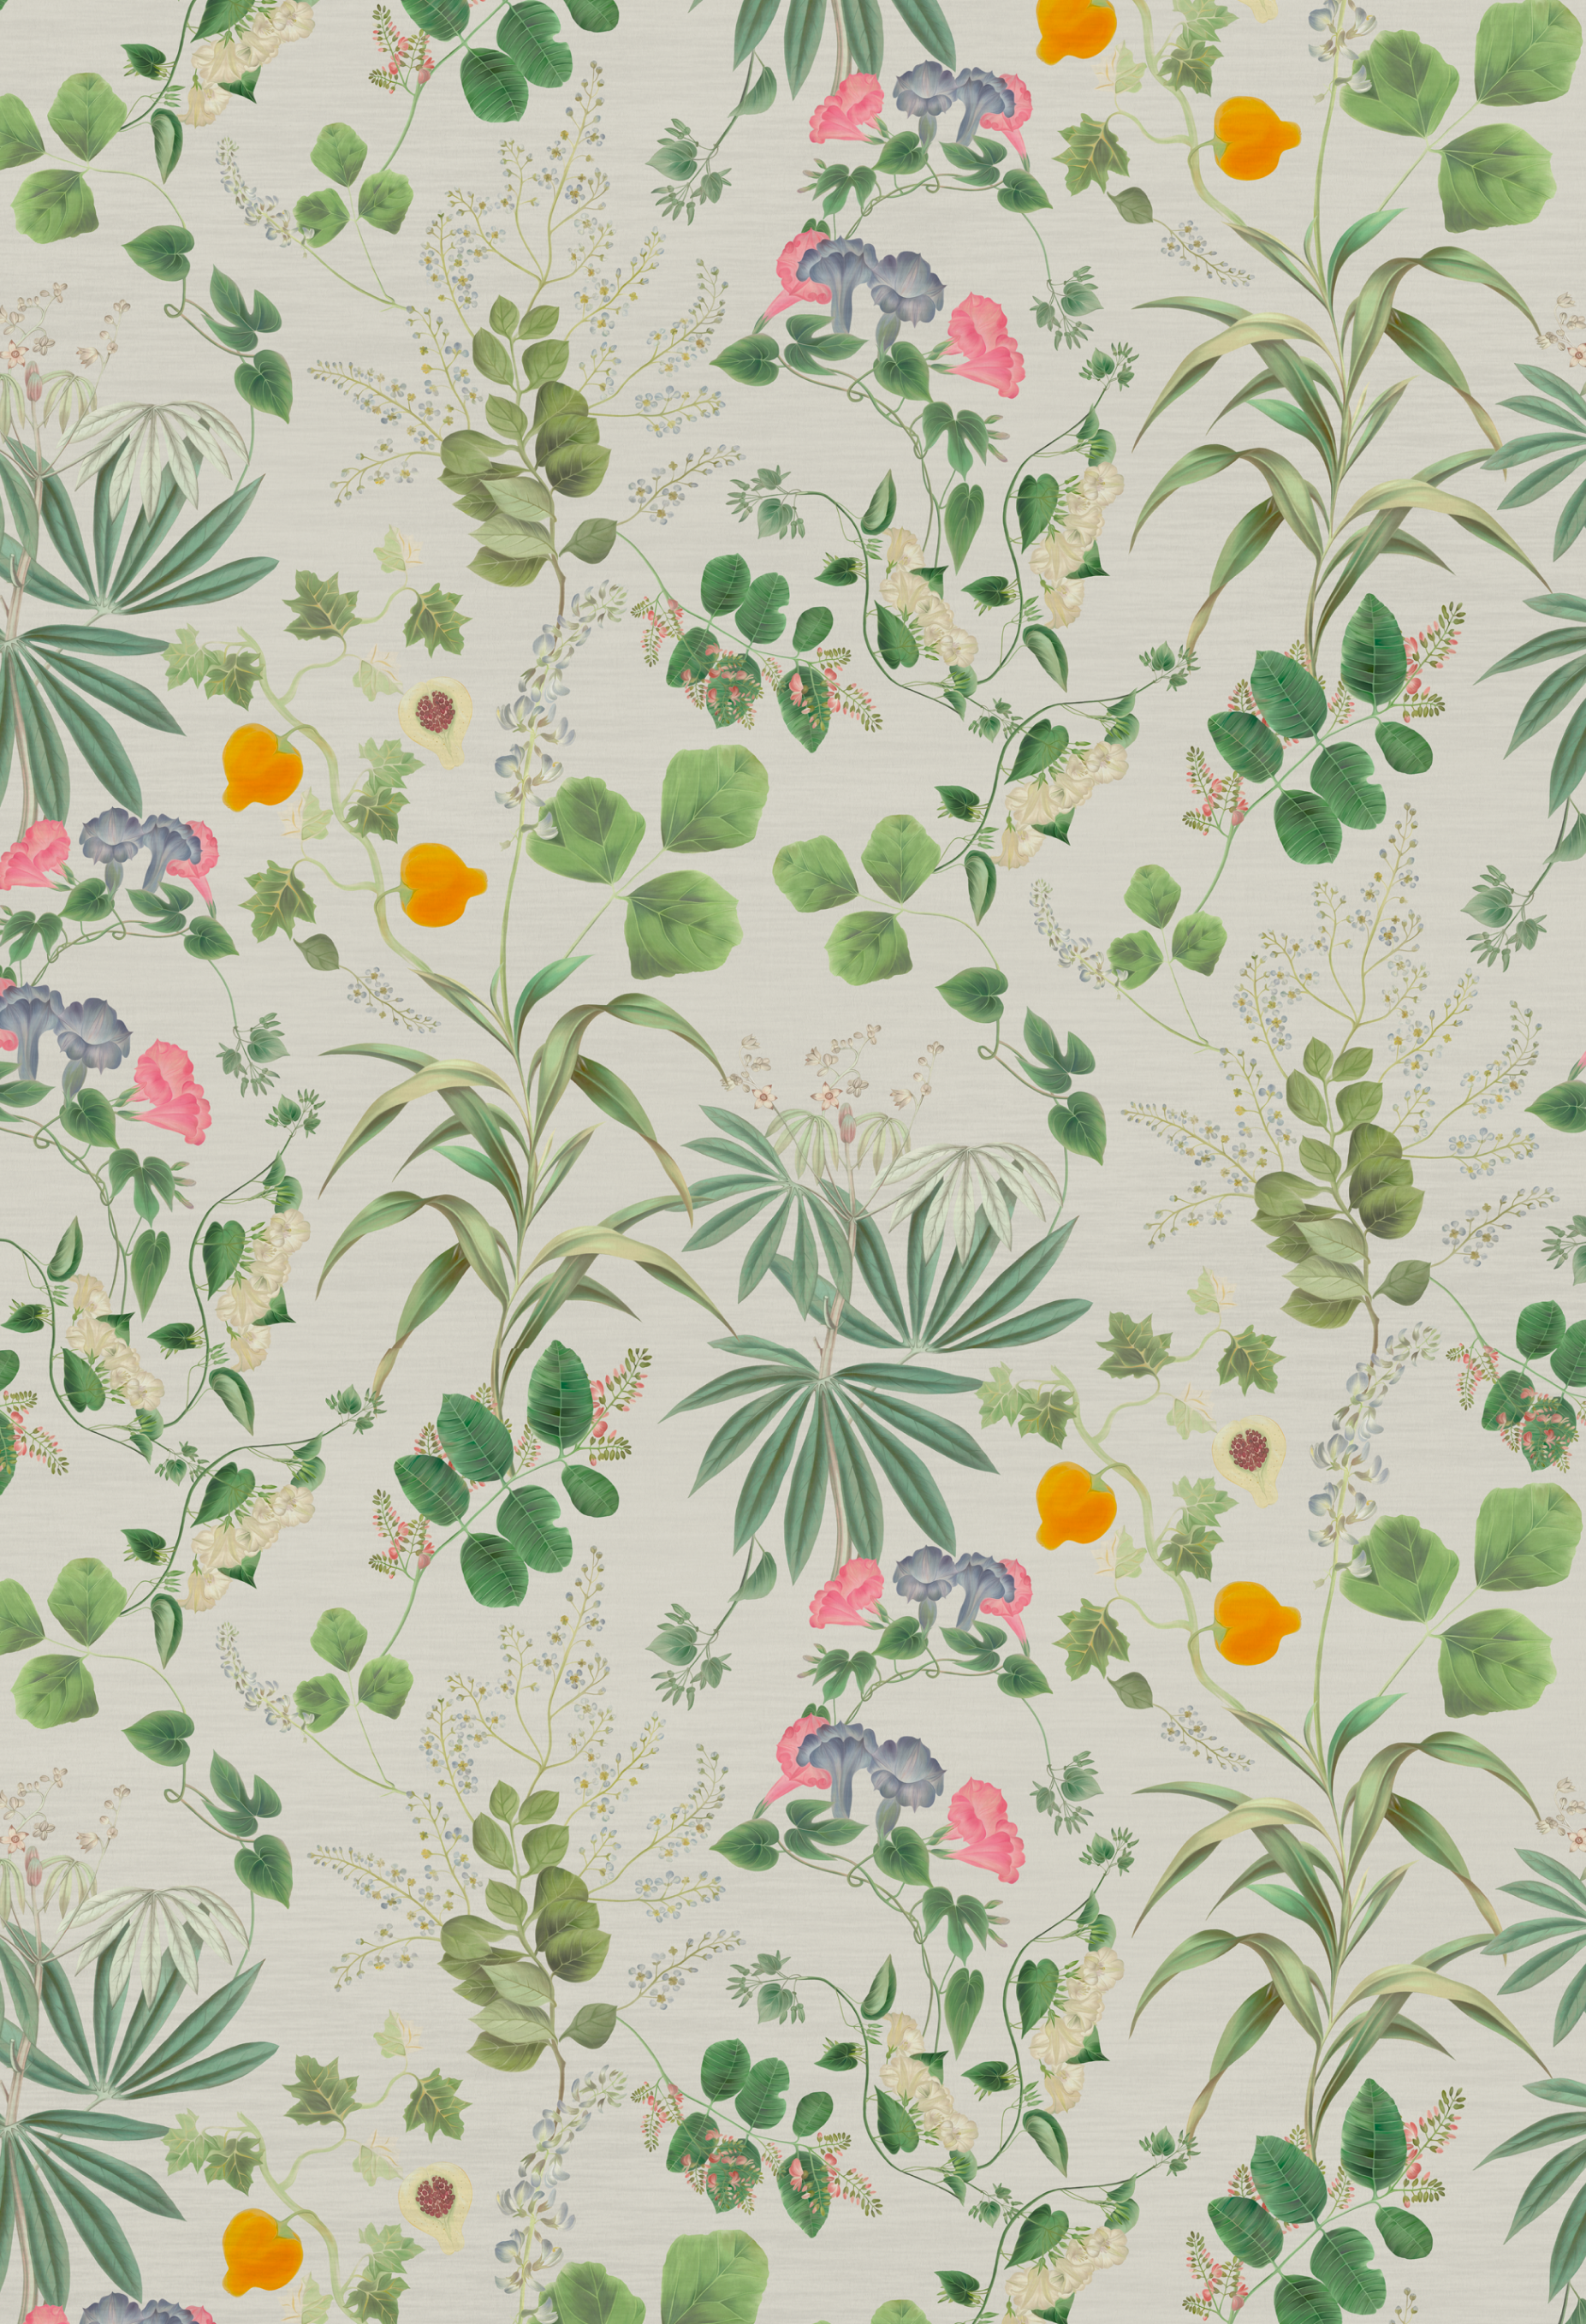 Green sprigs surrounded by floral fruit Eden Wallpaper on White Meadow Ground by Deus ex Gardenia.